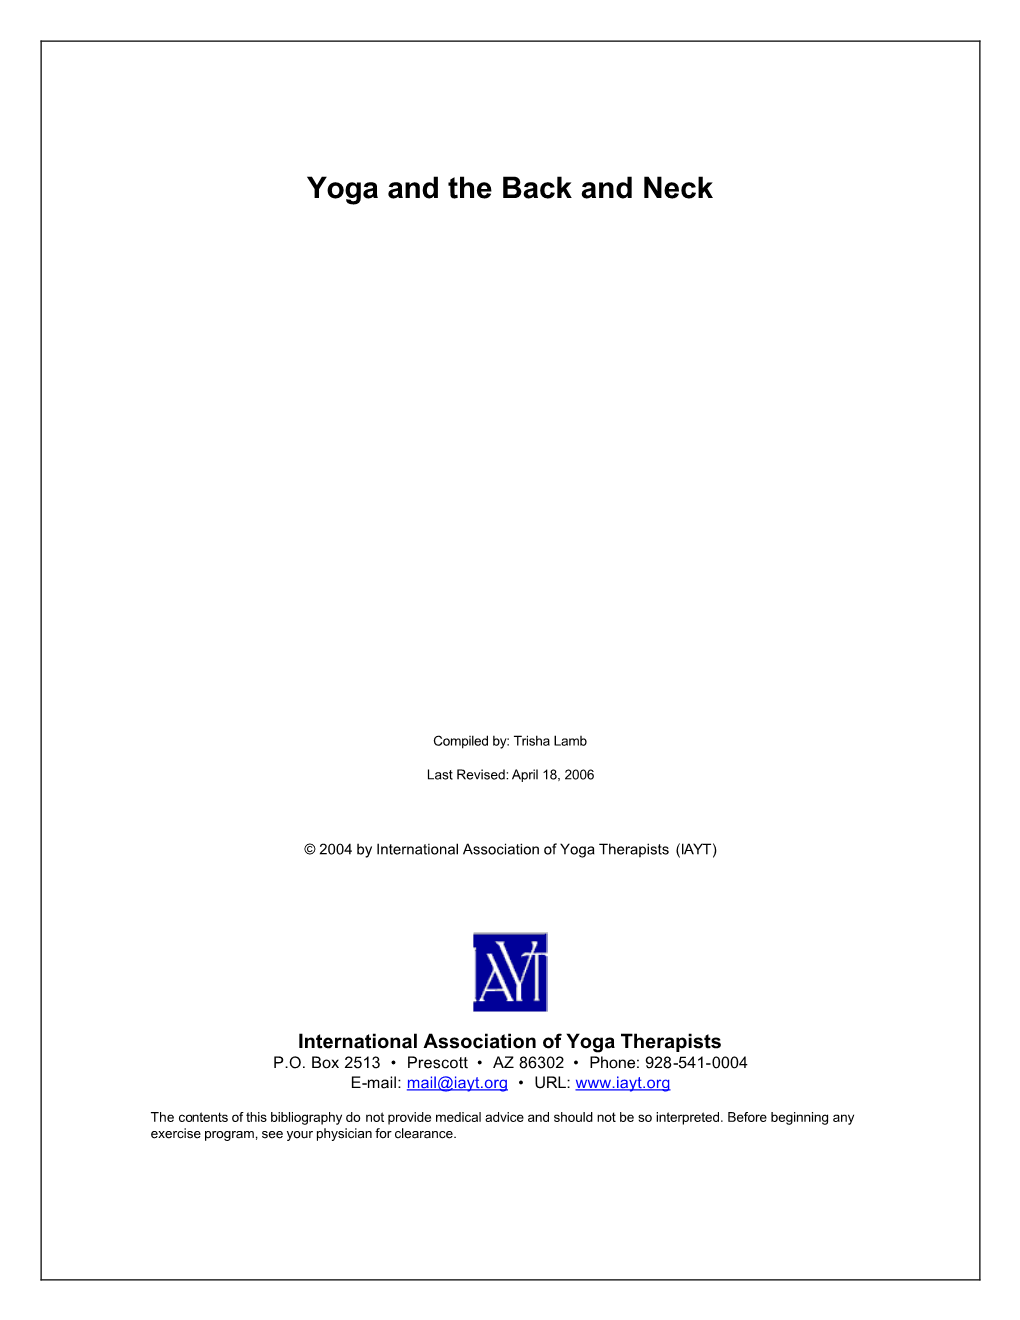 Yoga and the Back and Neck